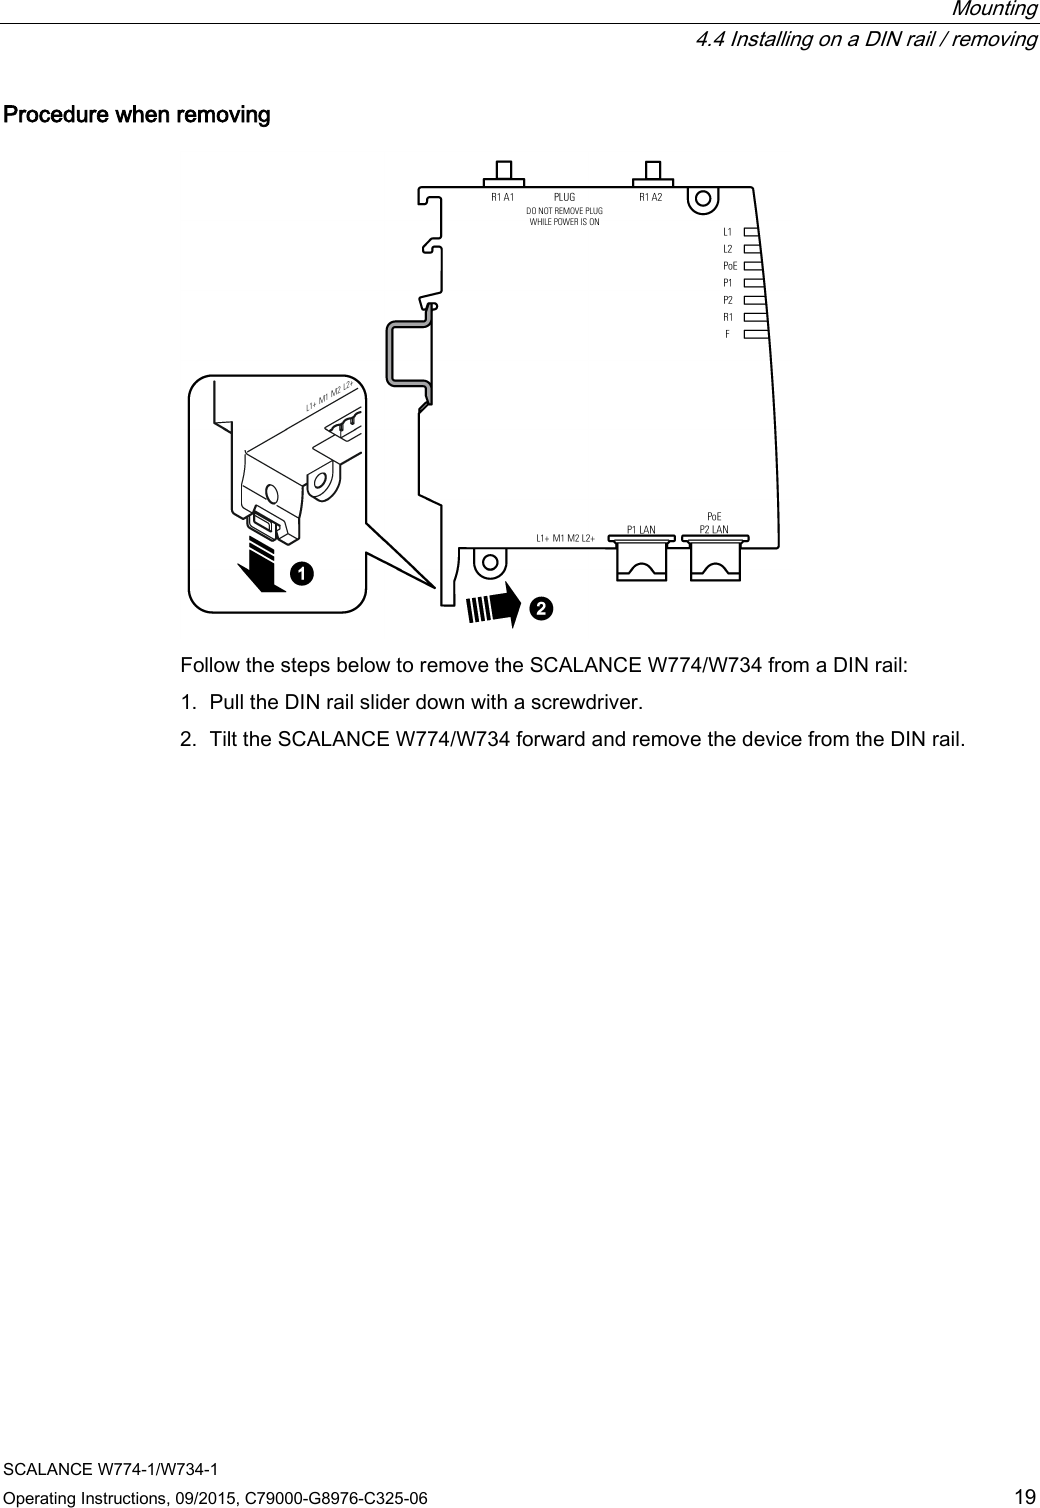  Mounting  4.4 Installing on a DIN rail / removing SCALANCE W774-1/W734-1 Operating Instructions, 09/2015, C79000-G8976-C325-06 19 Procedure when removing  Follow the steps below to remove the SCALANCE W774/W734 from a DIN rail: 1. Pull the DIN rail slider down with a screwdriver. 2. Tilt the SCALANCE W774/W734 forward and remove the device from the DIN rail.   